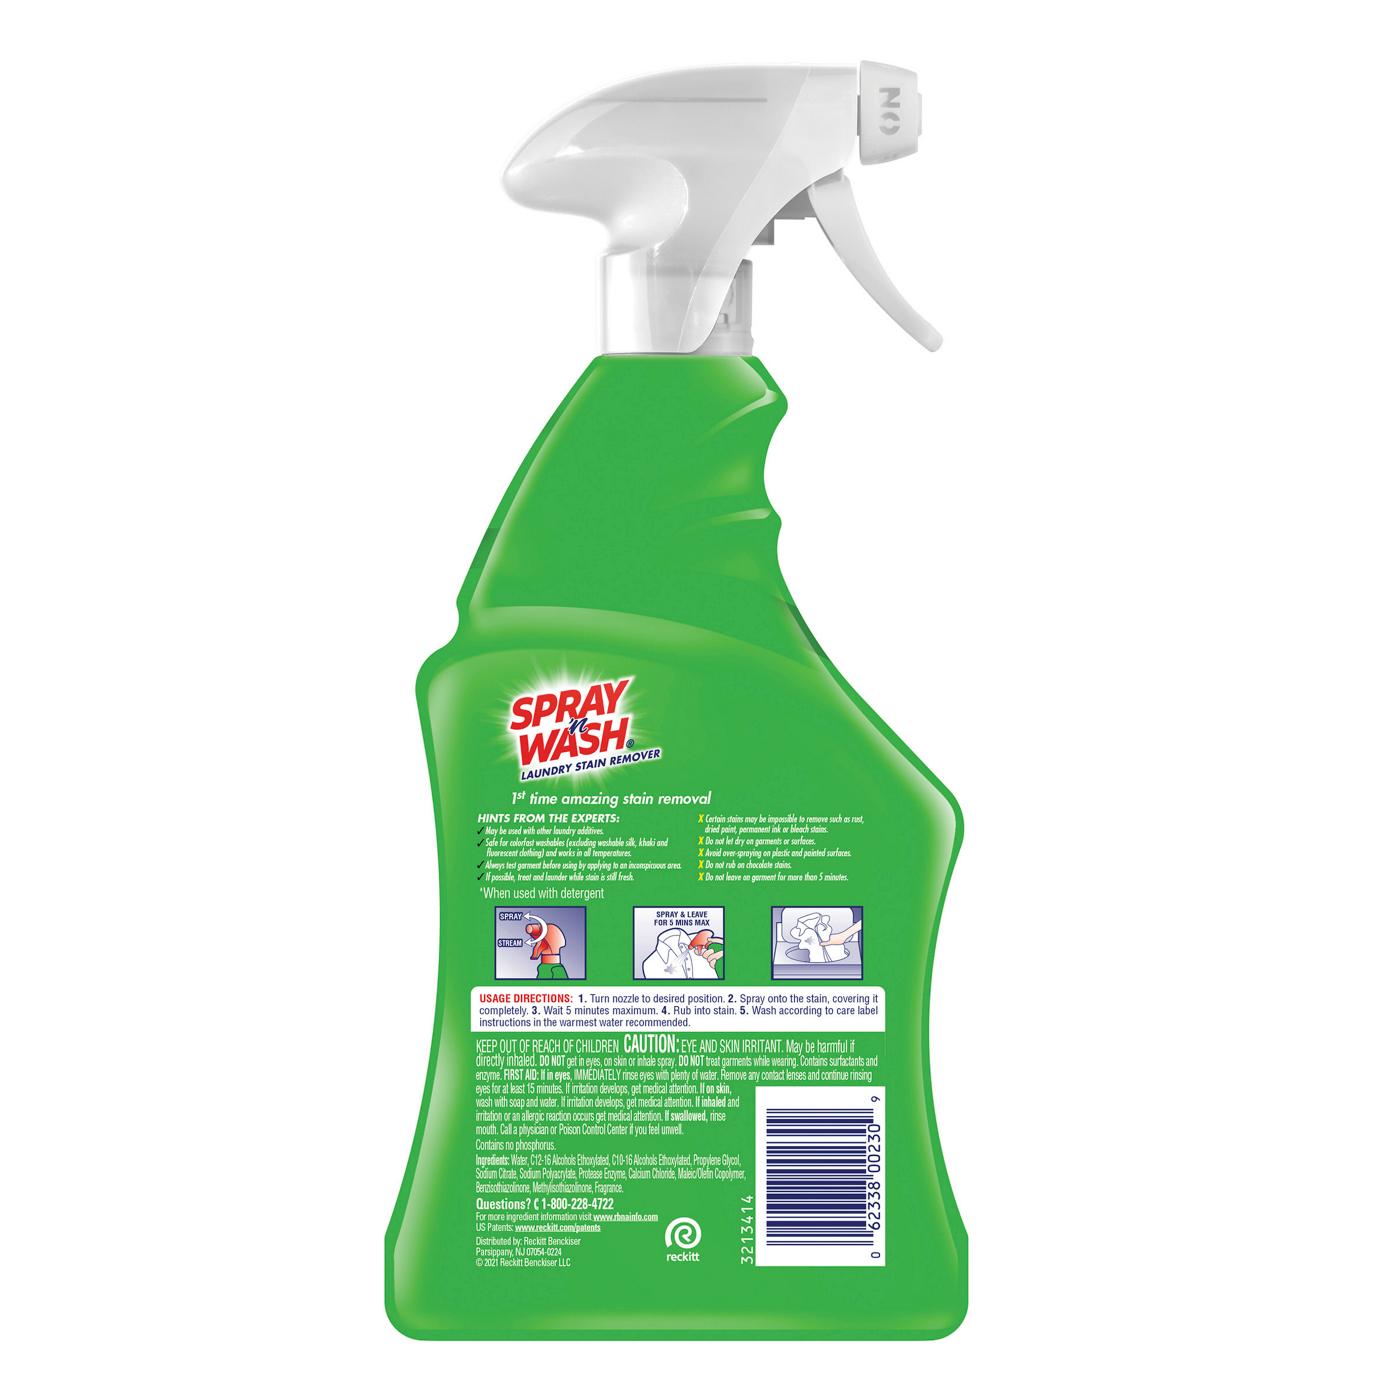  Spray 'n Wash Laundry Stain Remover, 3.0 Ounce